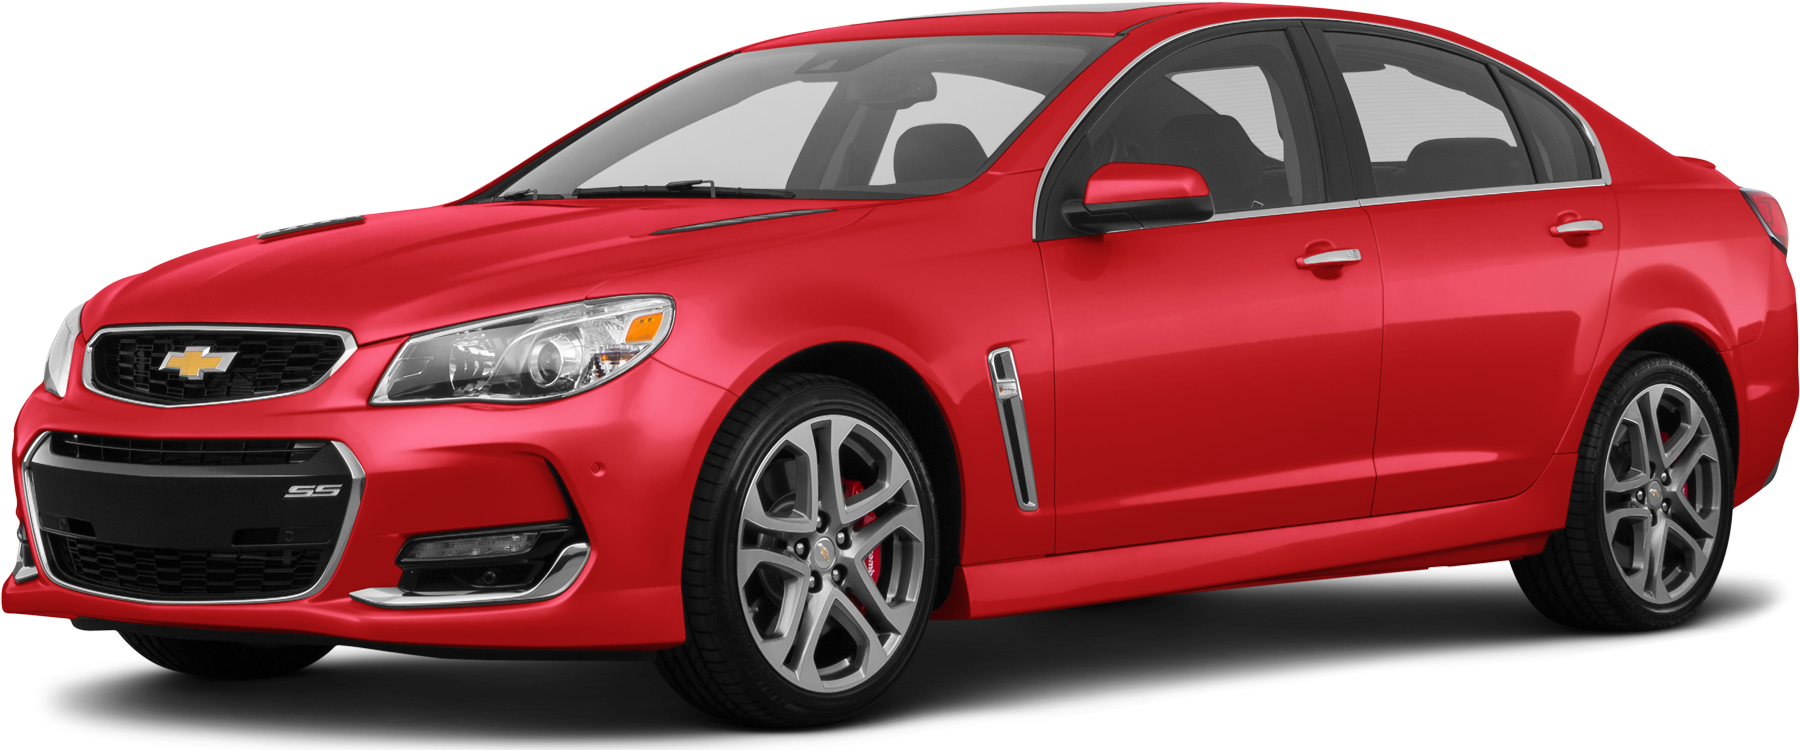 2017 Chevy SS Values & Cars for Sale | Kelley Blue Book